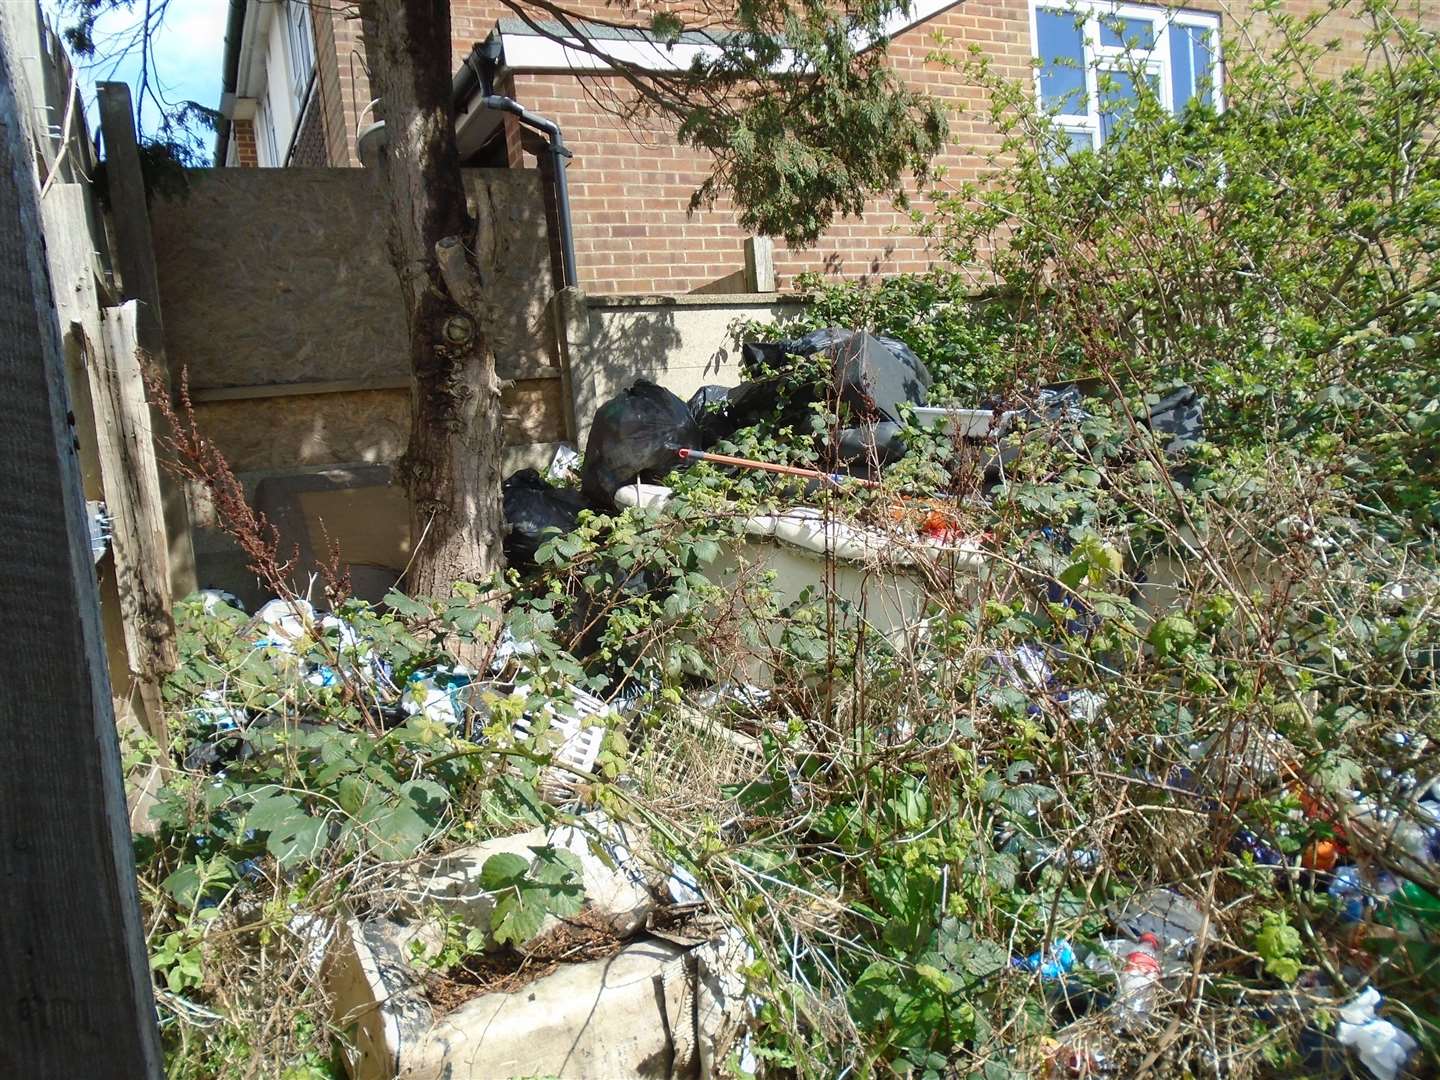 The waste at Two Bells Inn, Folkestone. Picture: Folkestone & Hythe District Council